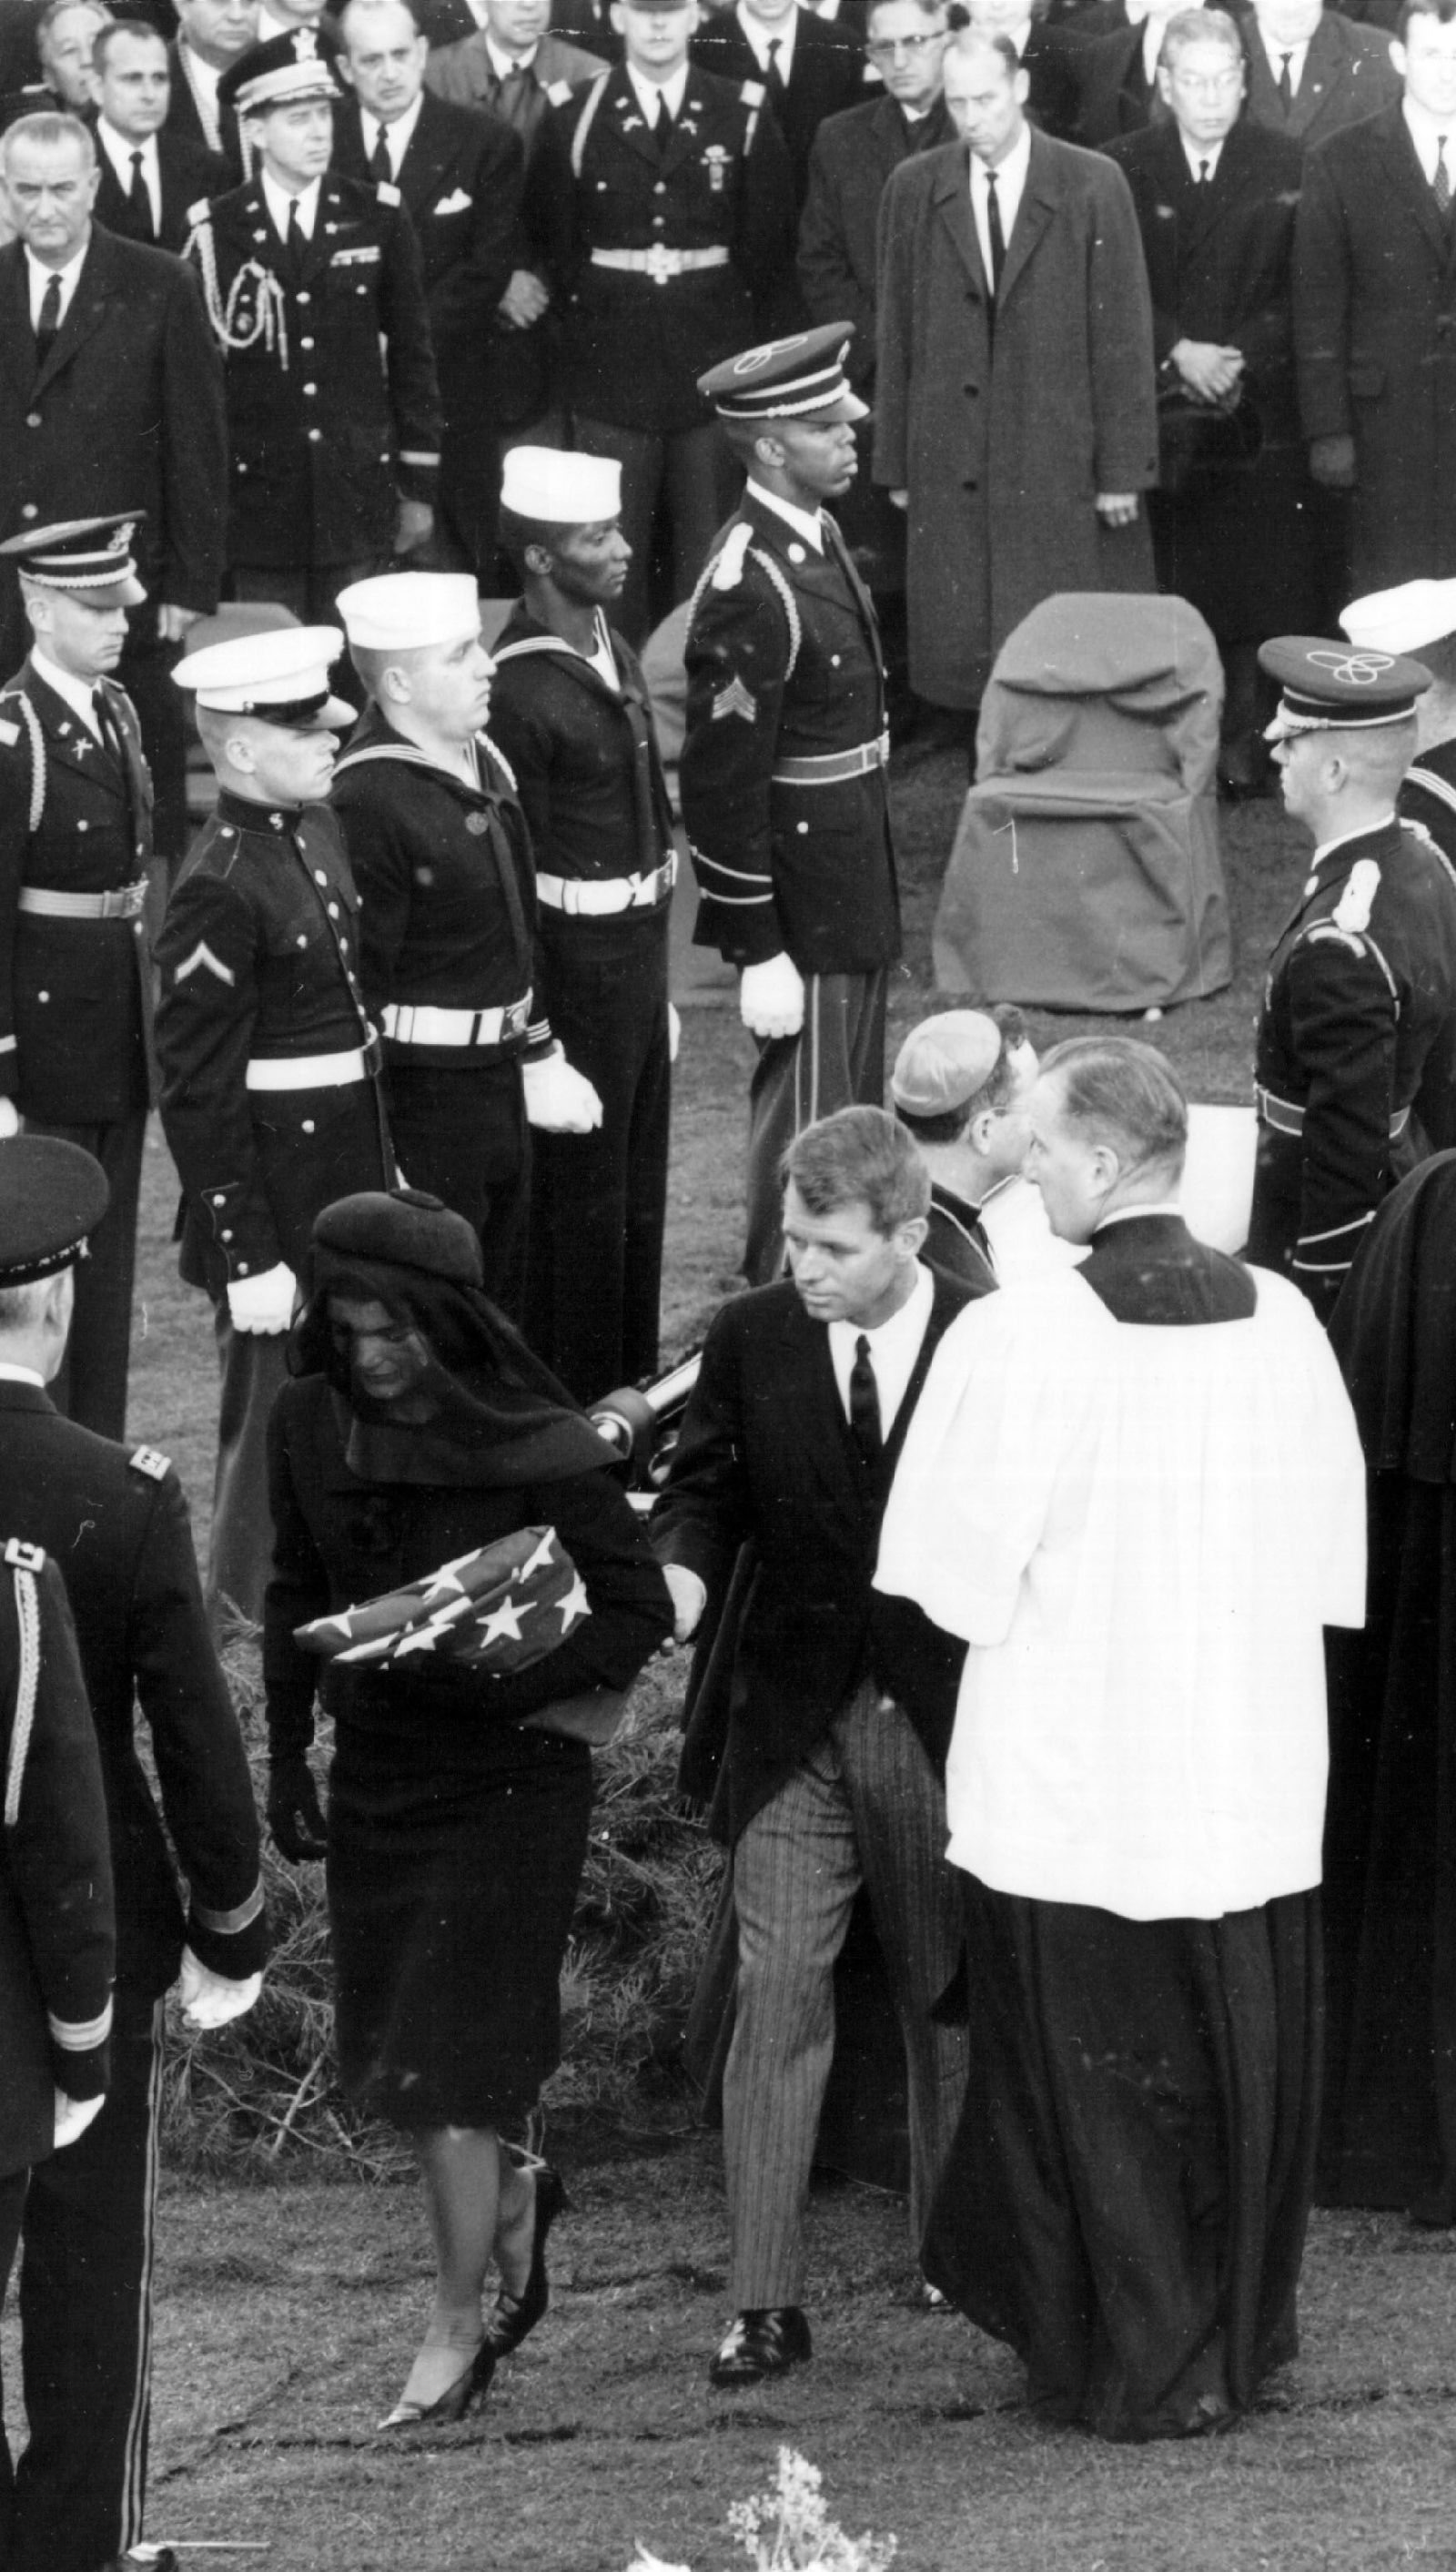 Jfk Funeral Pictures : Jfk S Funeral Photos From A Day Of Shock And